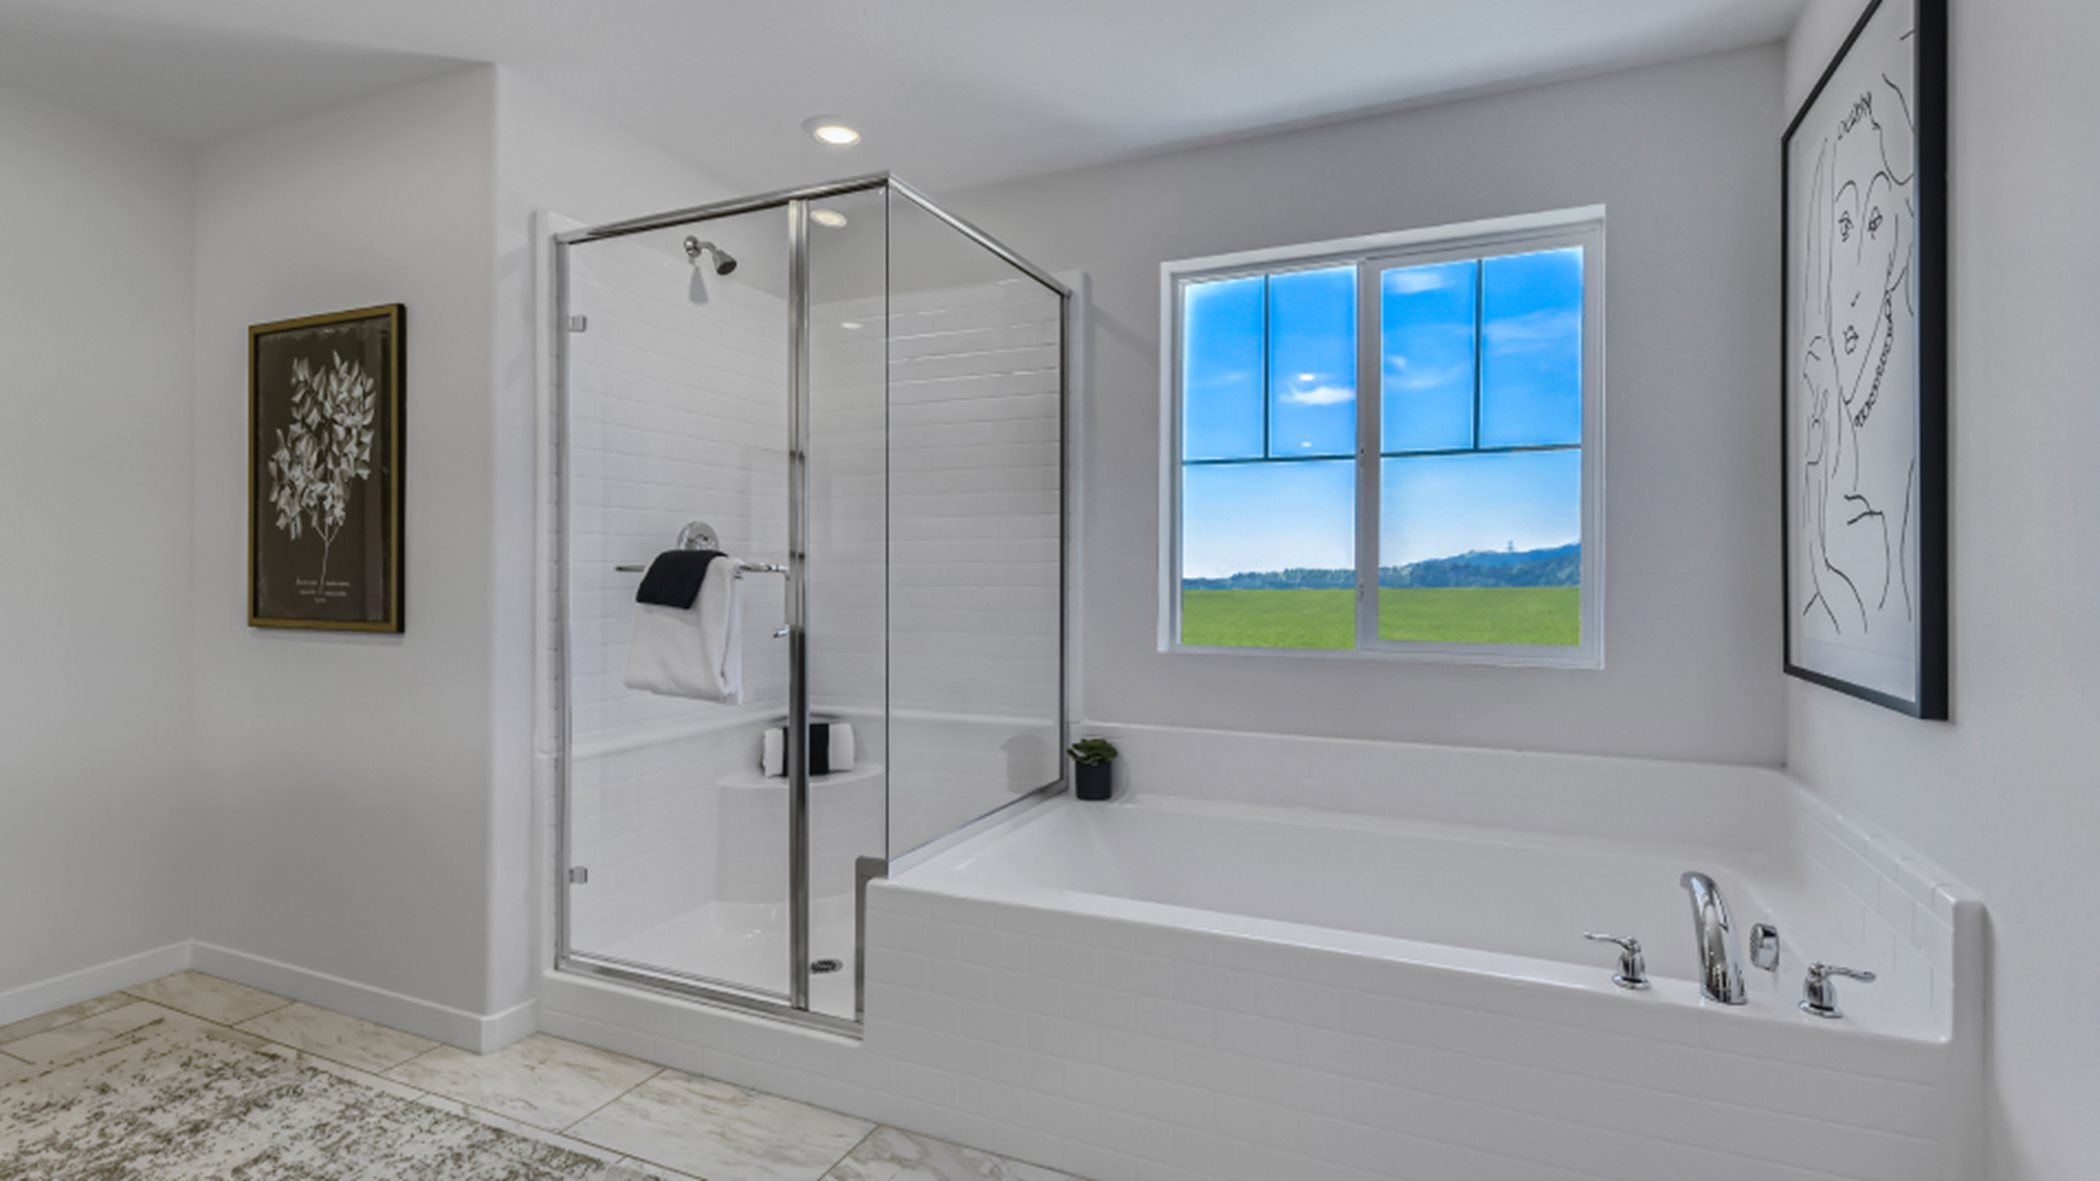 Owner's suite bathroom with separate shower and tub